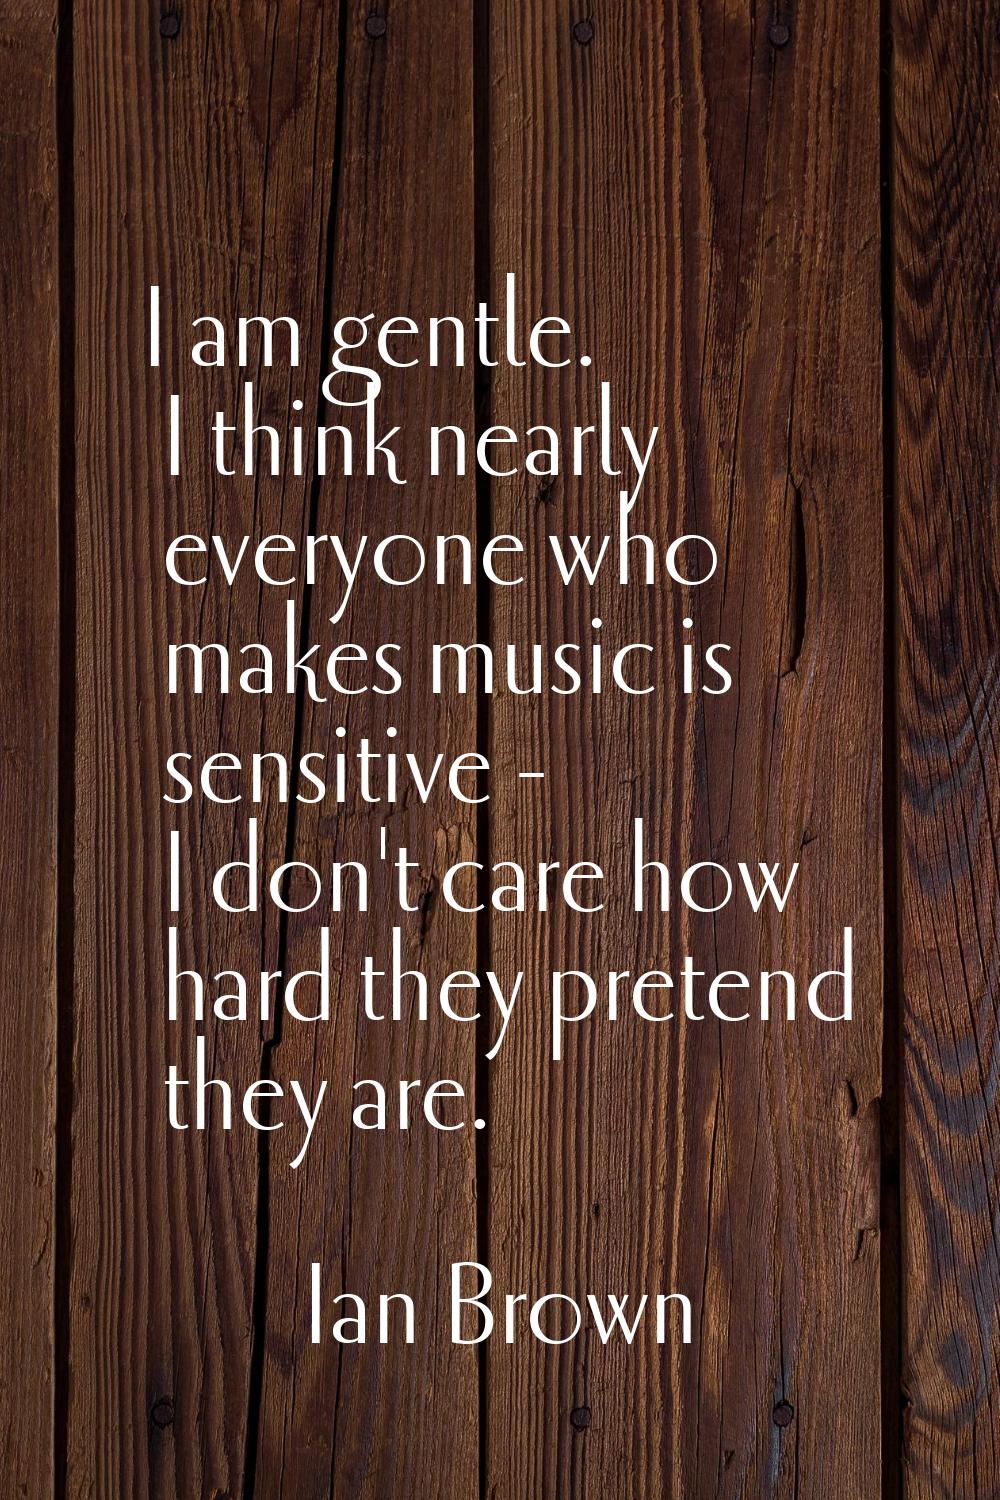 I am gentle. I think nearly everyone who makes music is sensitive - I don't care how hard they pret